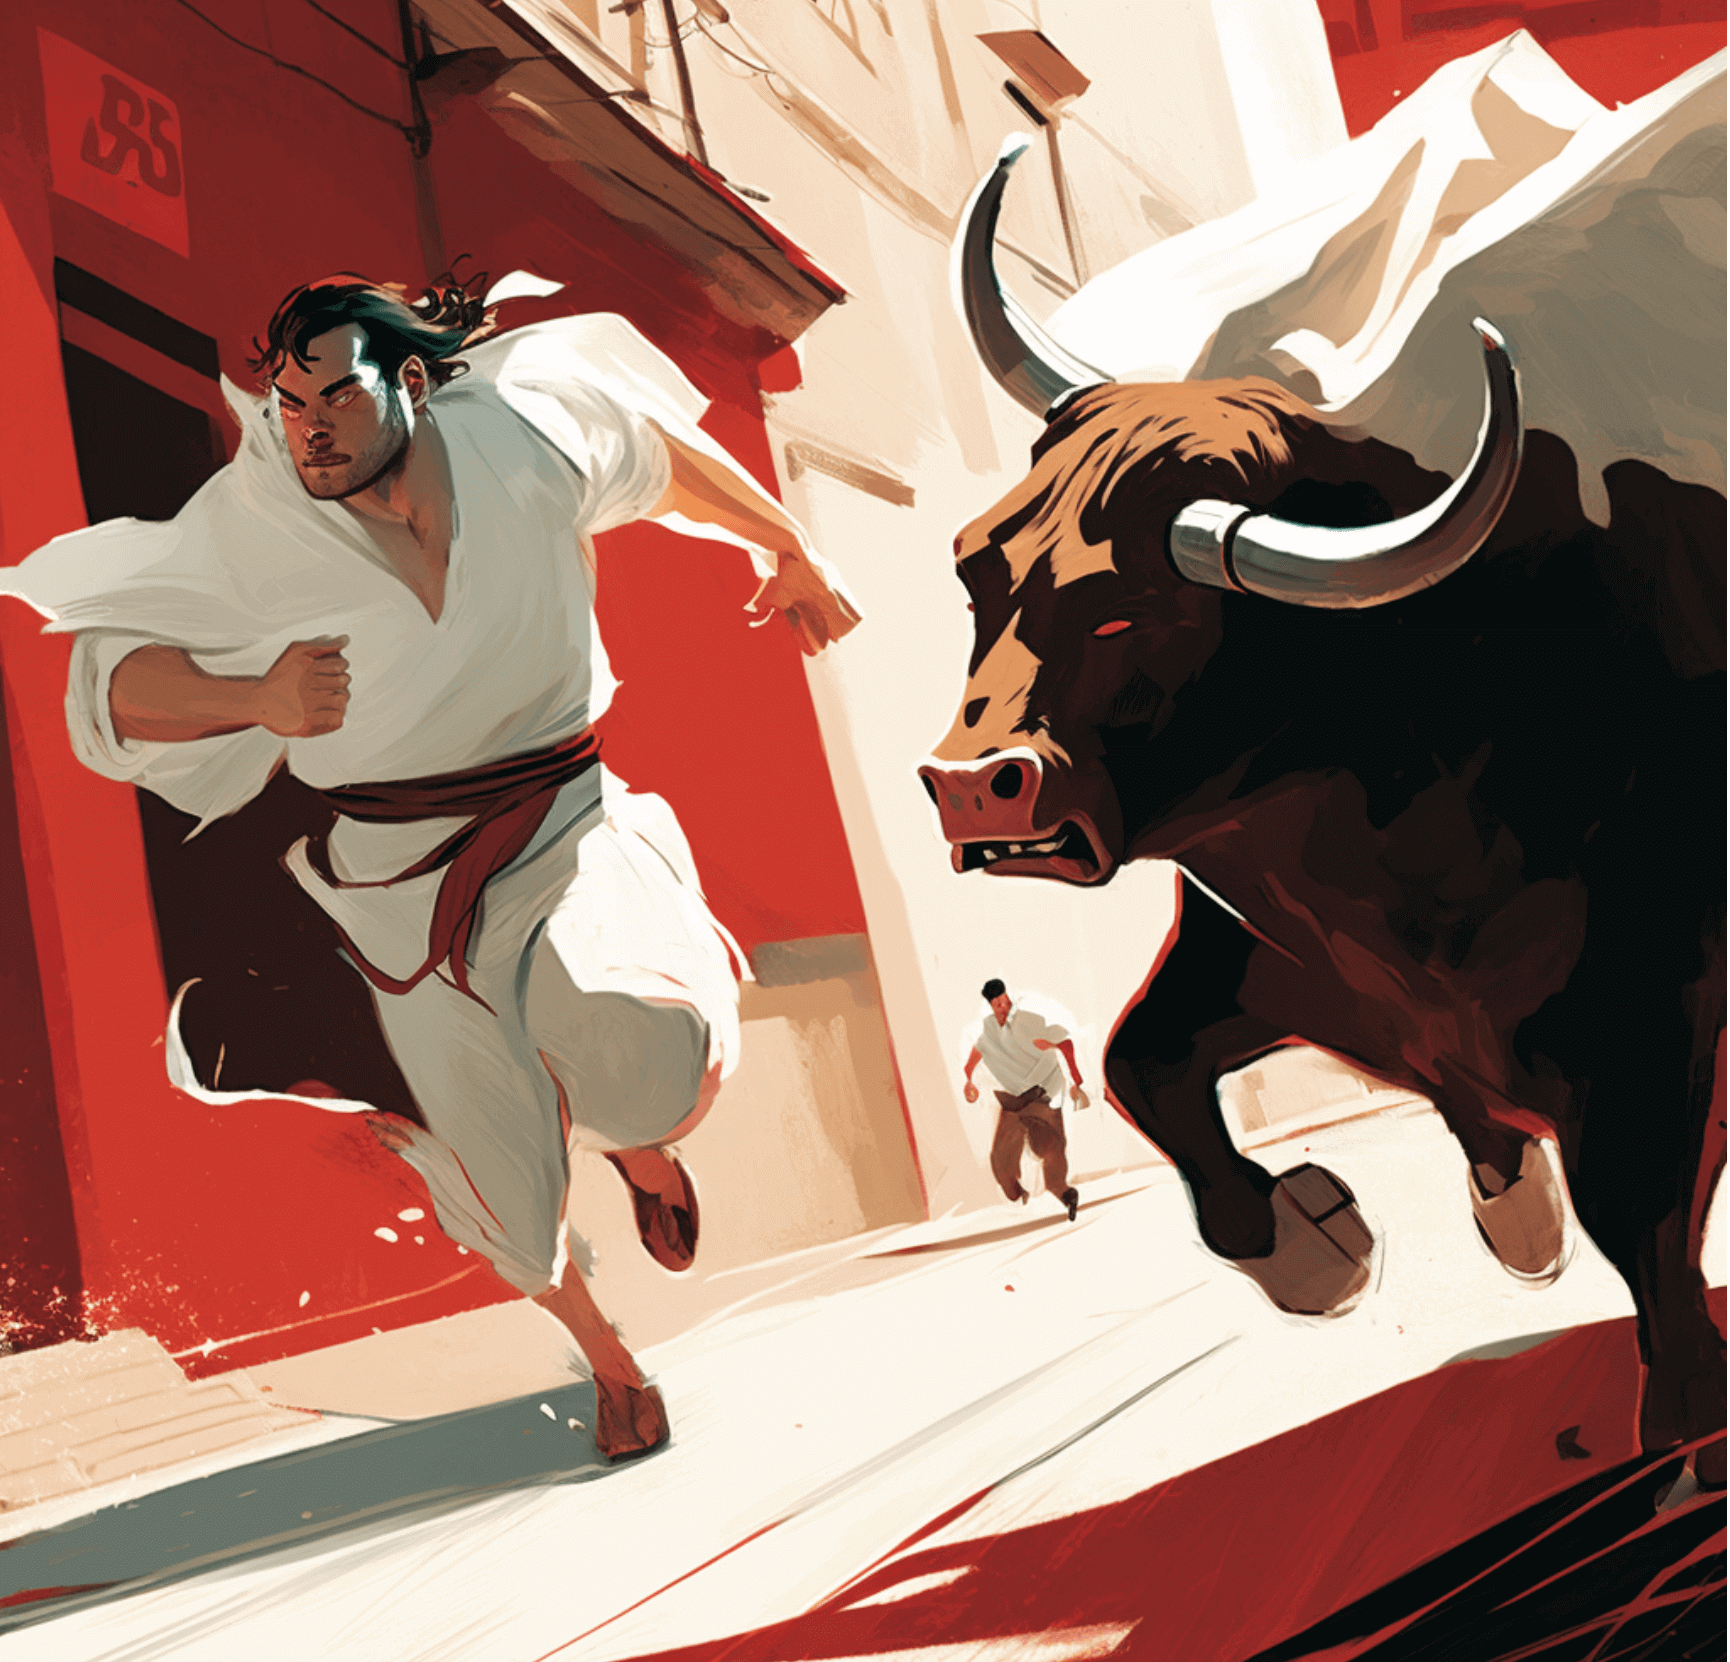 Guy dressed in white, running from a bull.